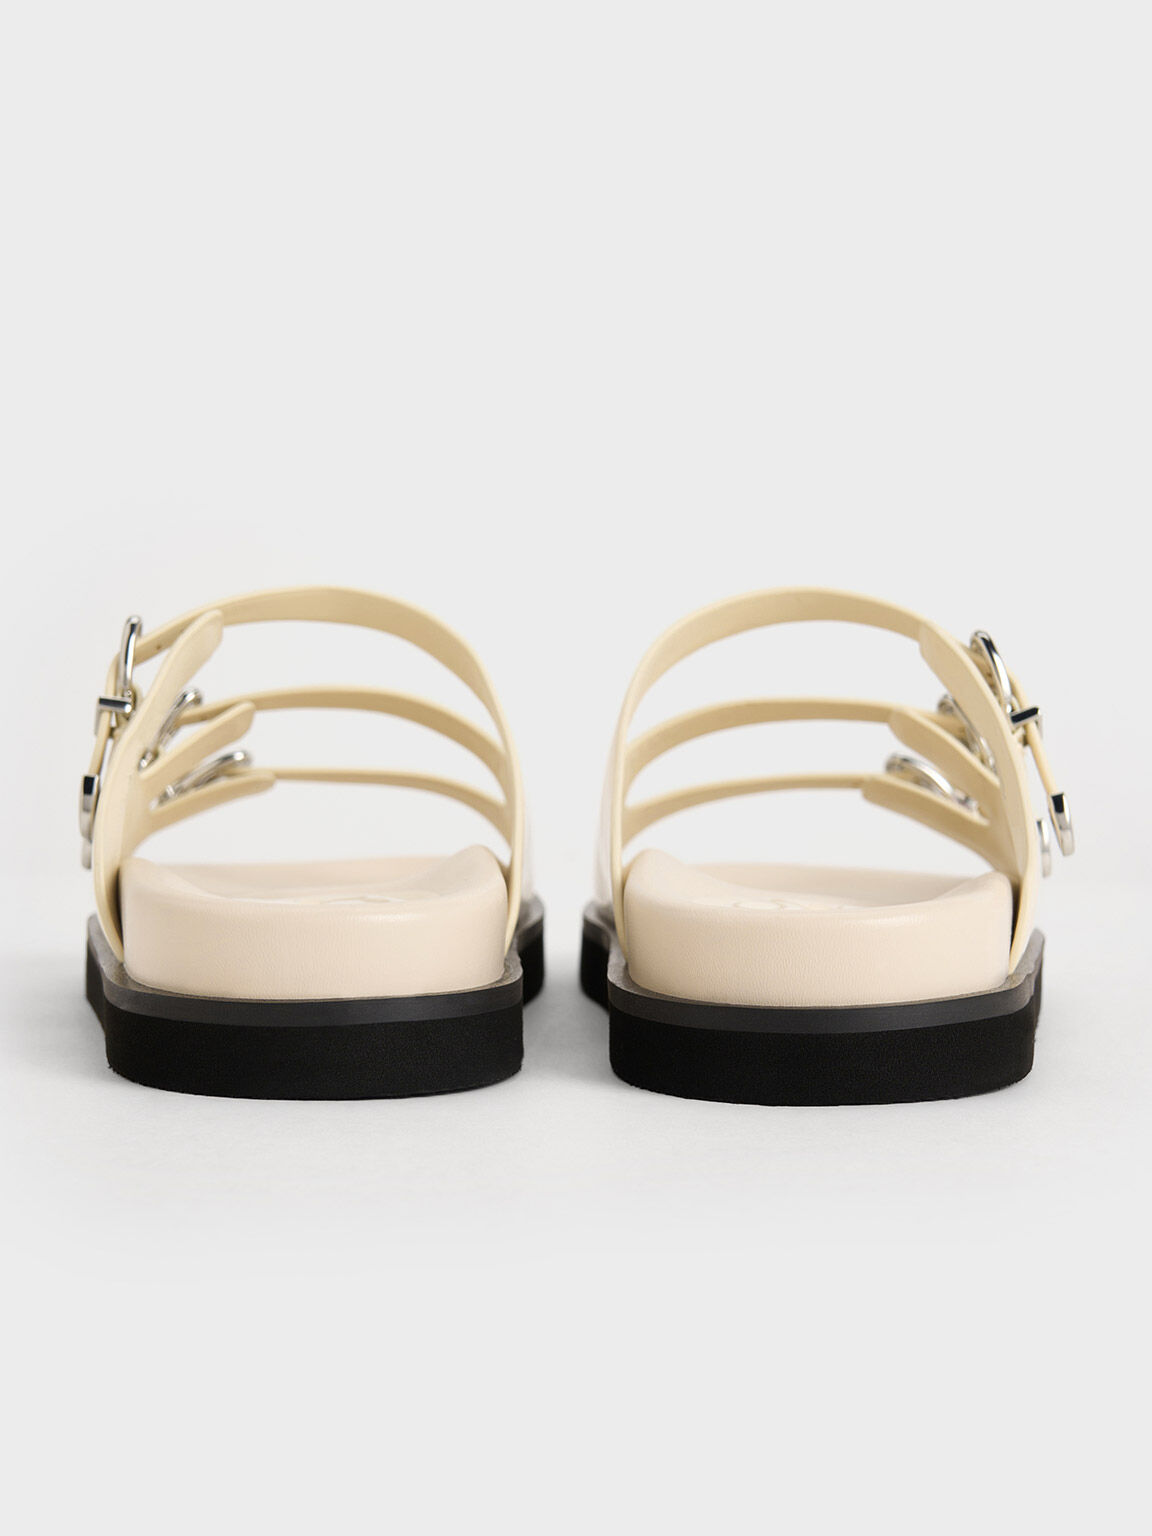 Women's Sandals | Shop Exclusive Styles | CHARLES & KEITH 